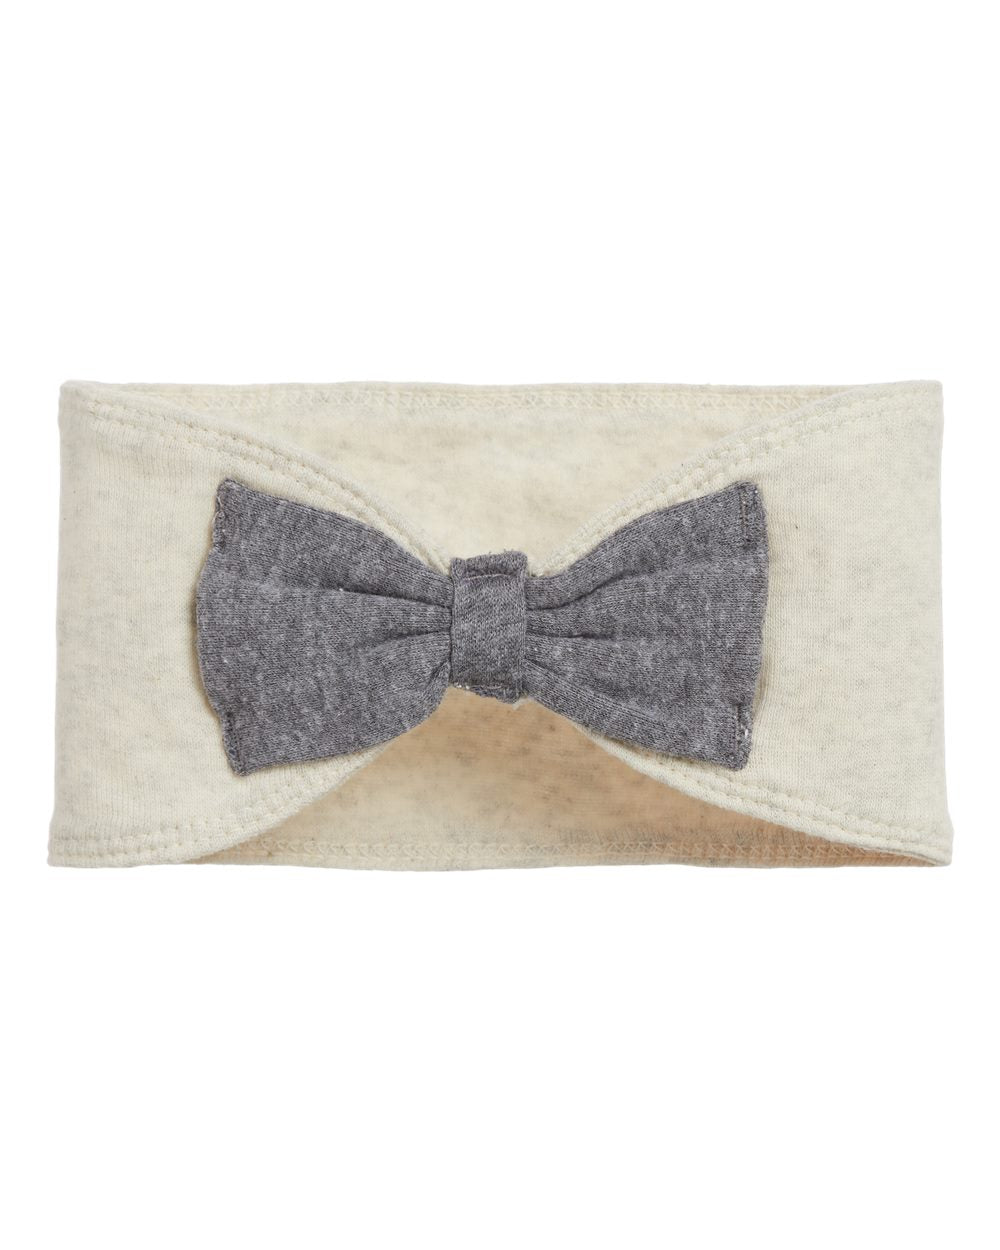 Baby Headband with Bow Tie, (Natural Heather - Granite Heather)